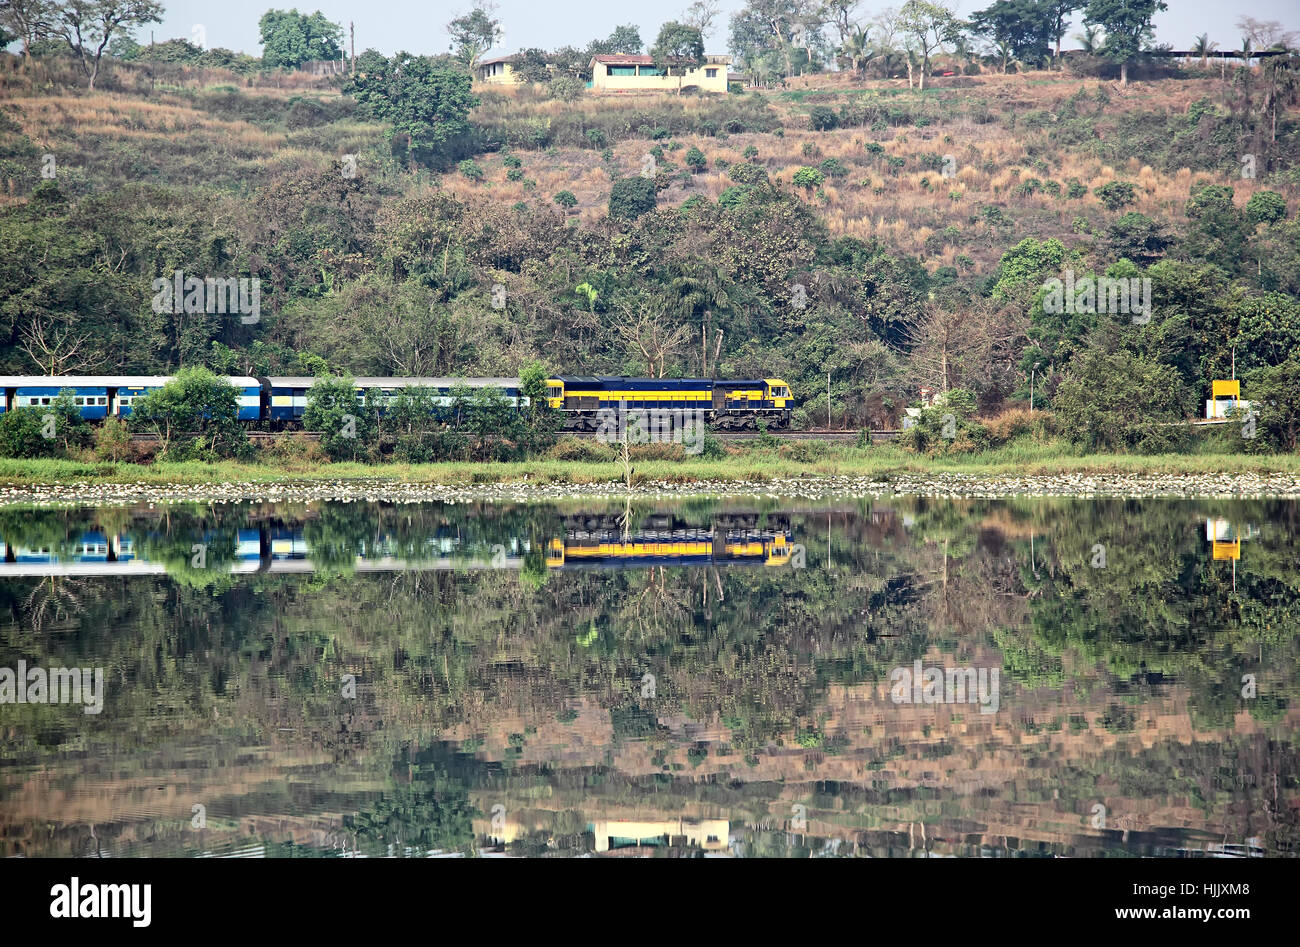 Passenger train of Indian Railways passing along the banks of lake in a hilly terrain, approaching a station in Goa, India Stock Photo